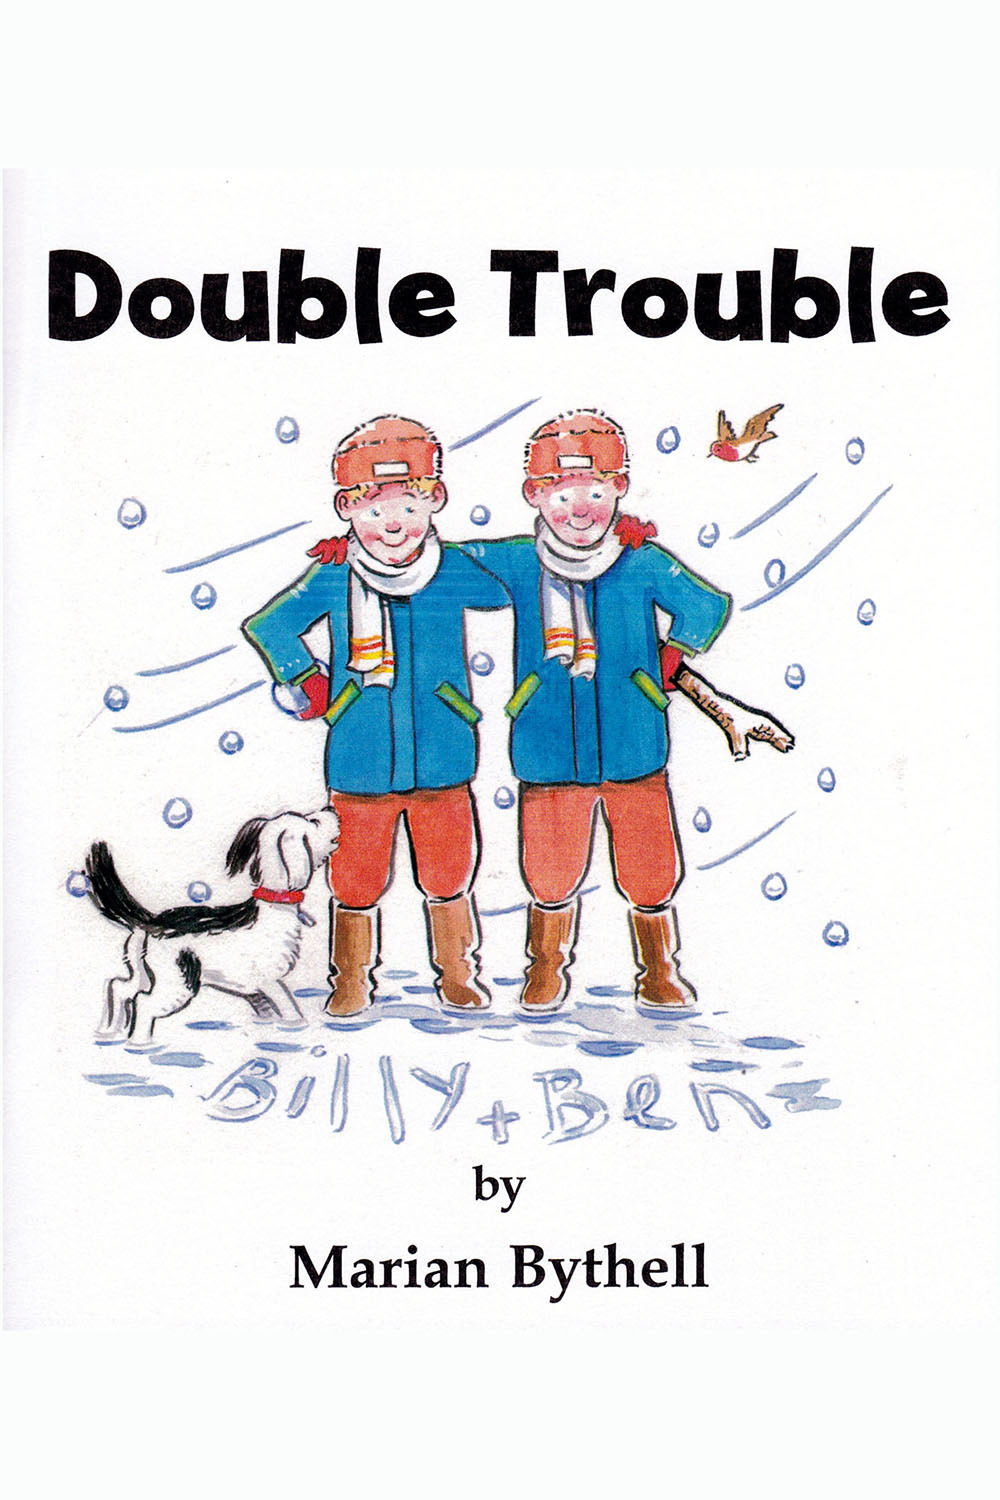 Bythell, Marian - Double Trouble, ebook